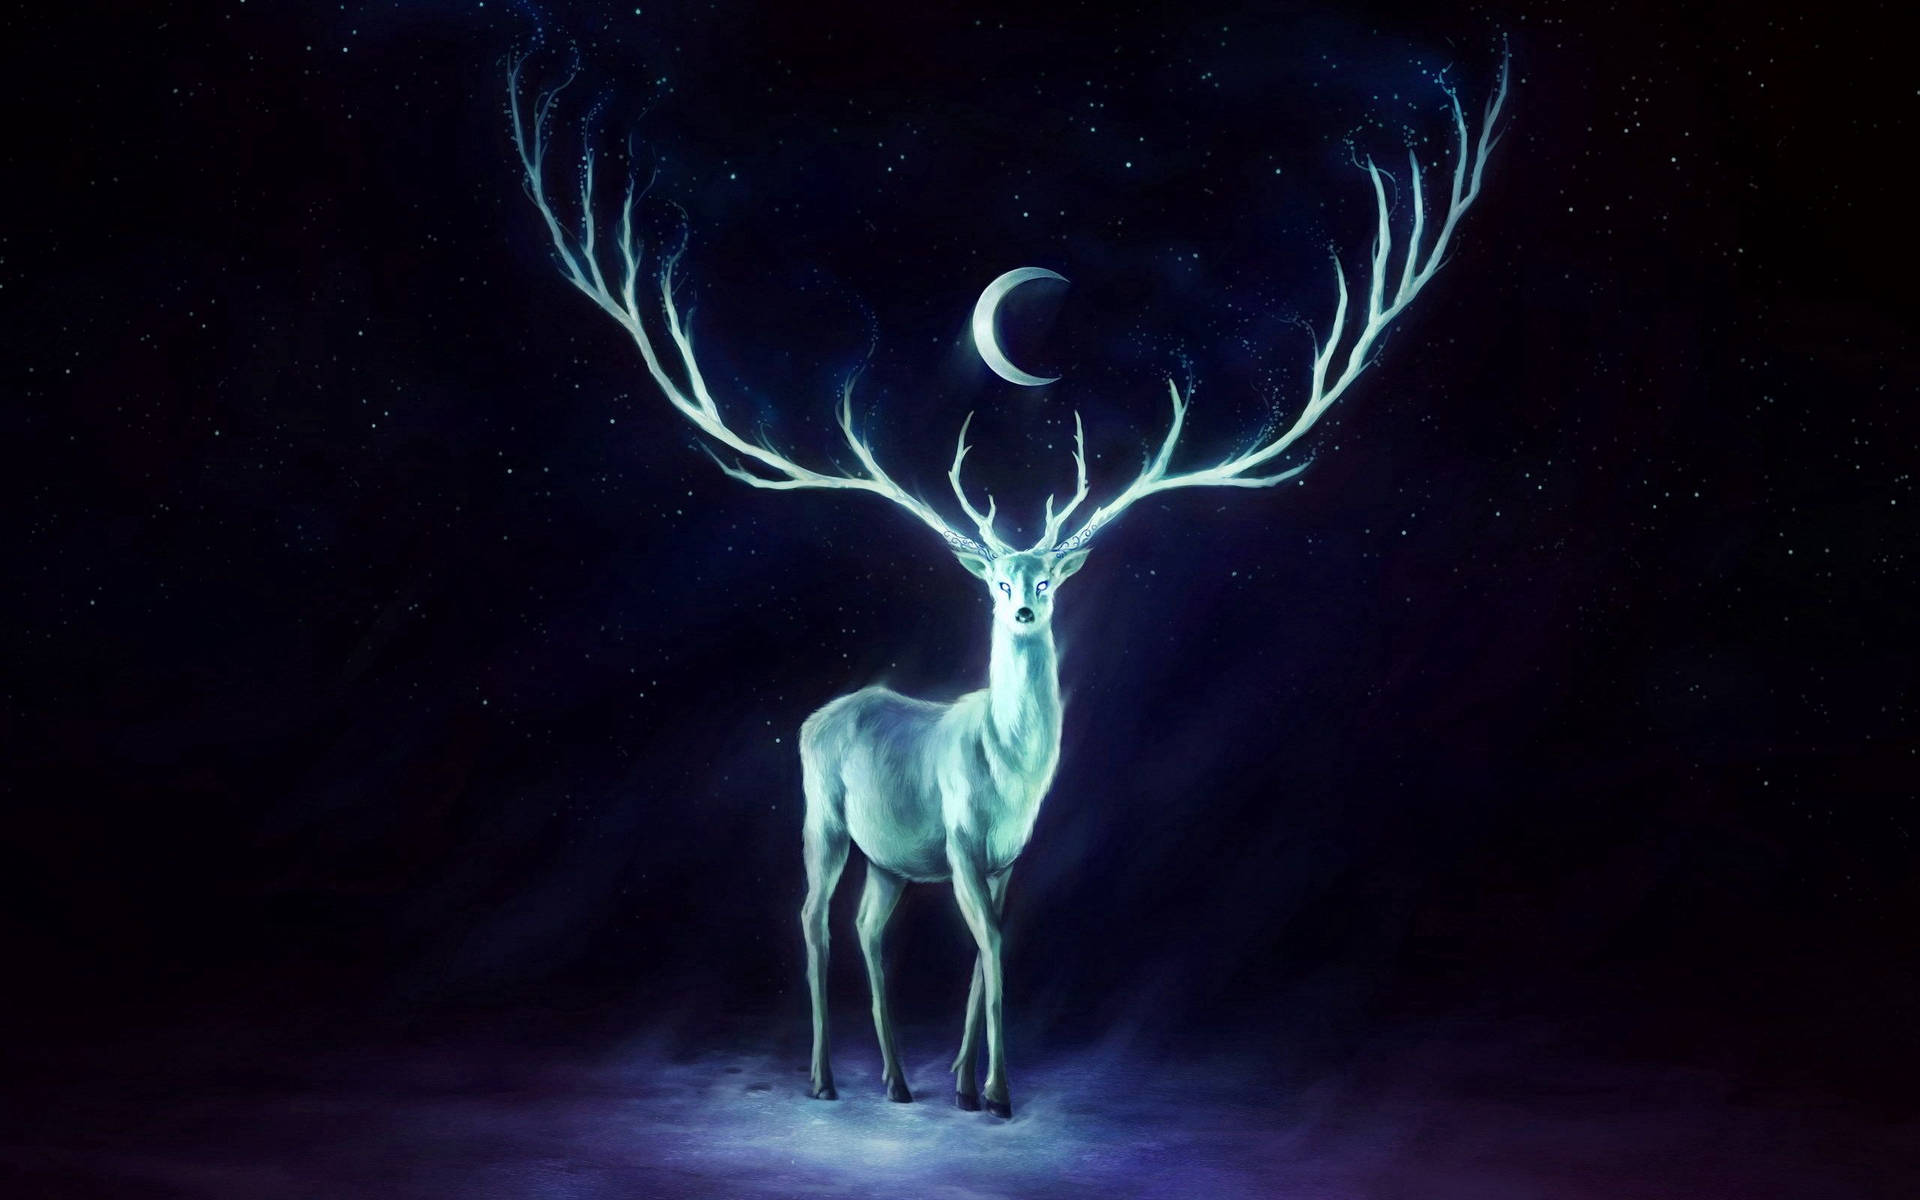 A mystical deer forms the shape of the Patronus Charm. Wallpaper